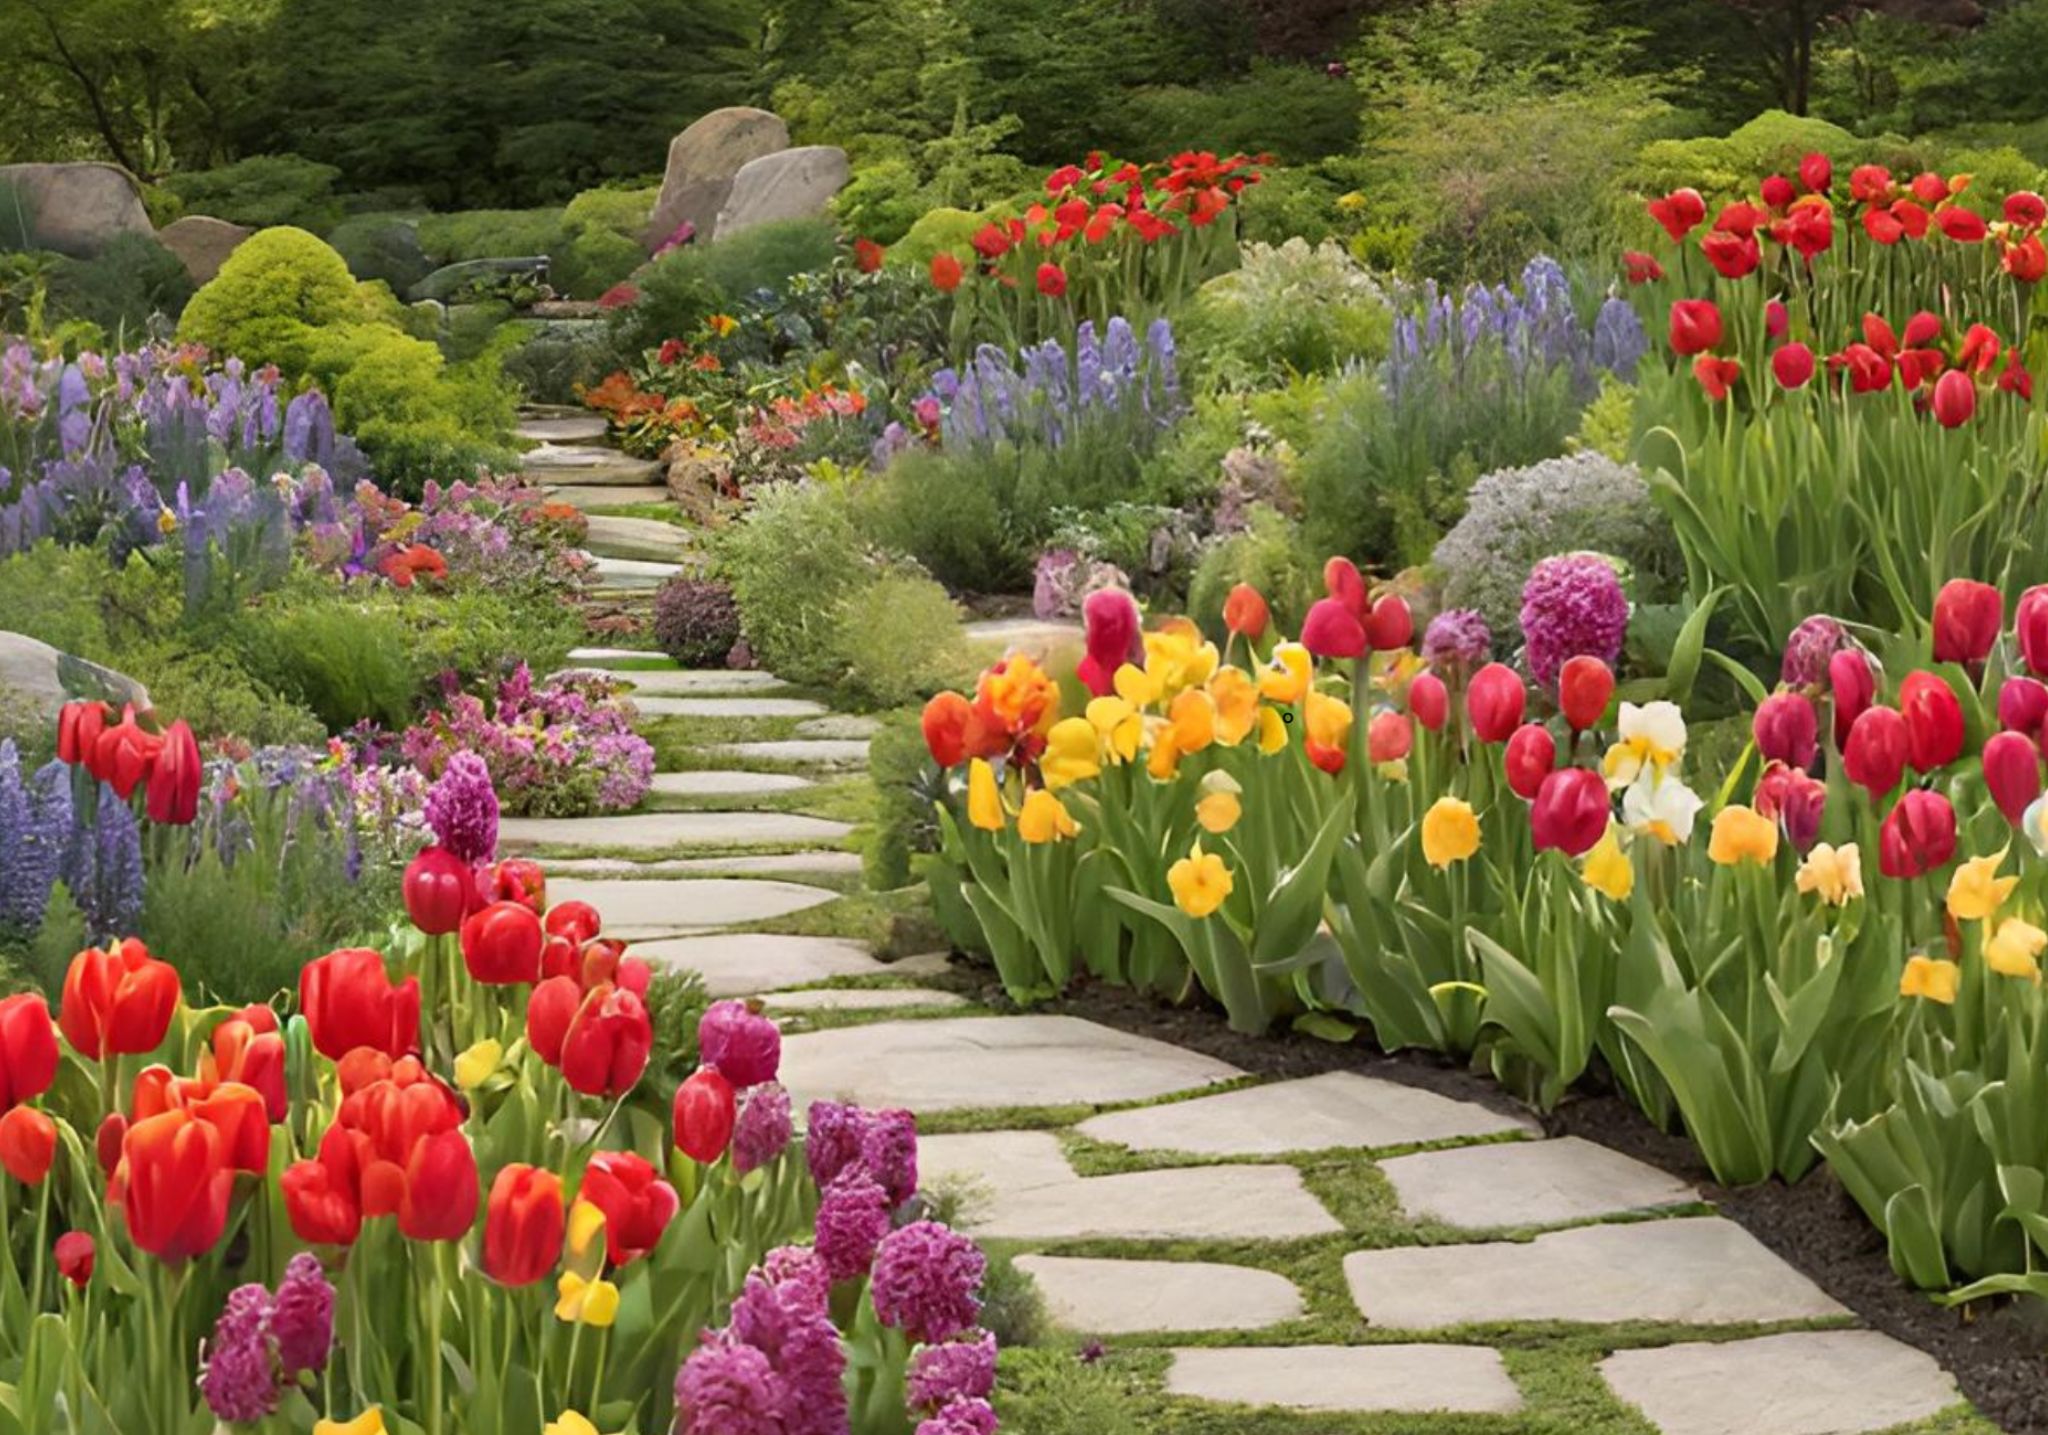 Stone path surrounded by tulips and jasmine in a beautiful spring garden